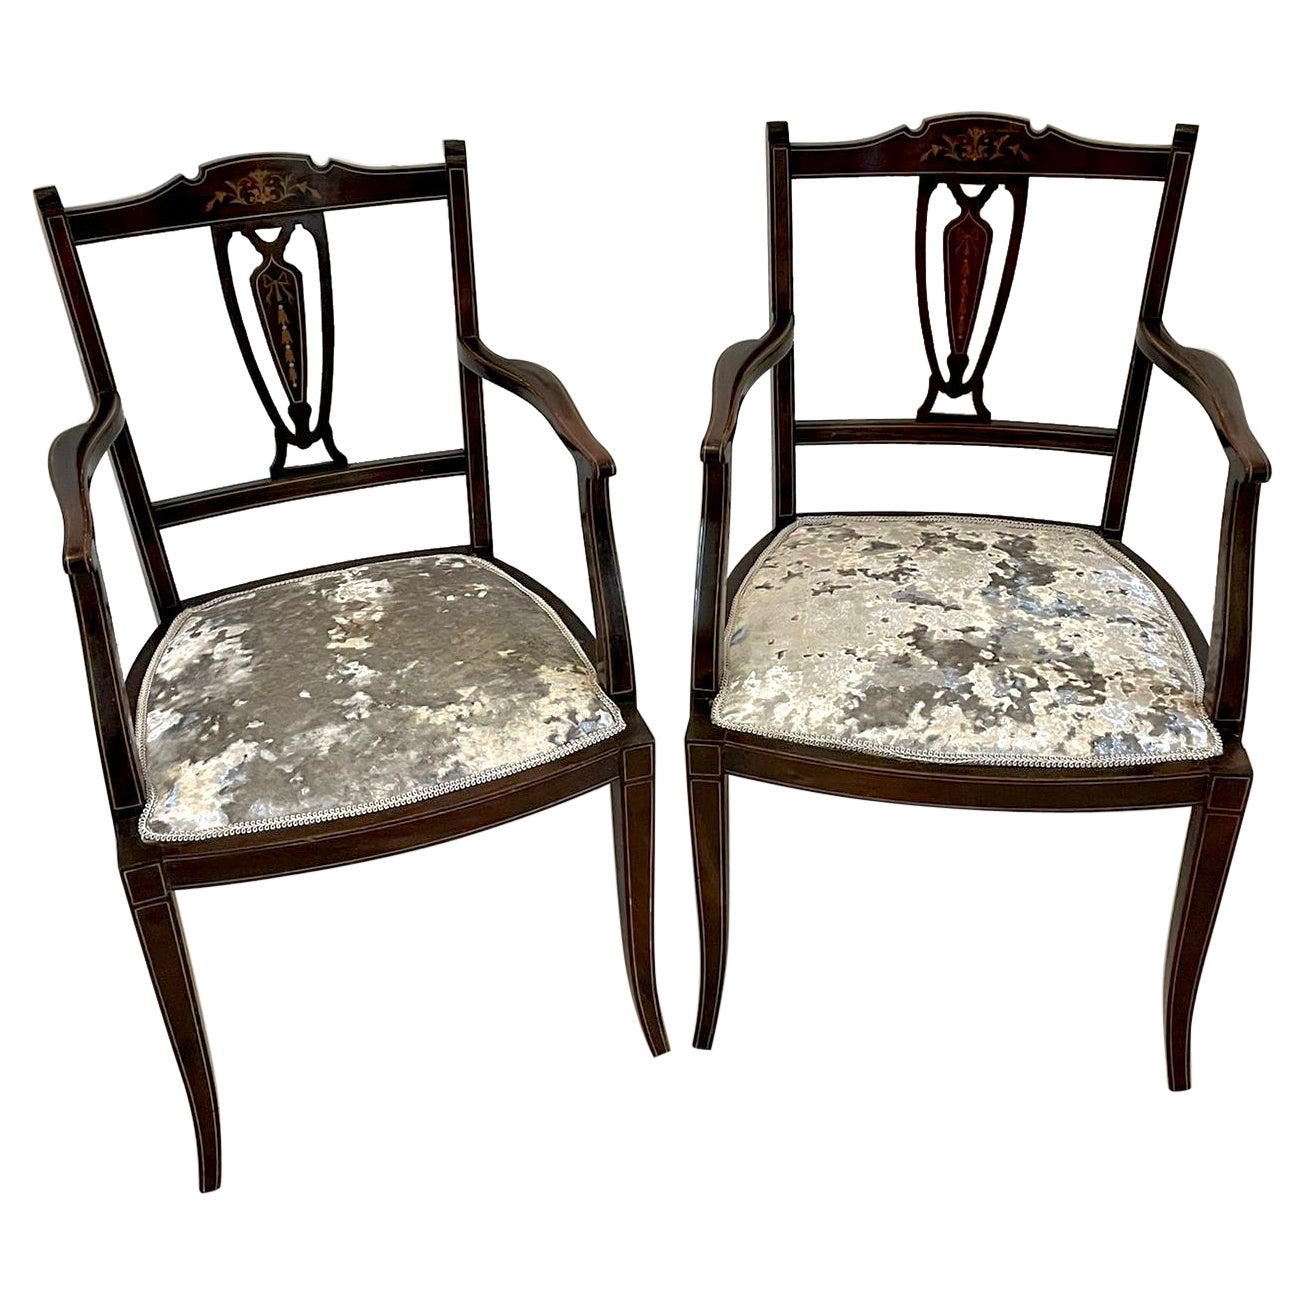 Pair of Antique Edwardian Mahogany Inlaid Armchairs